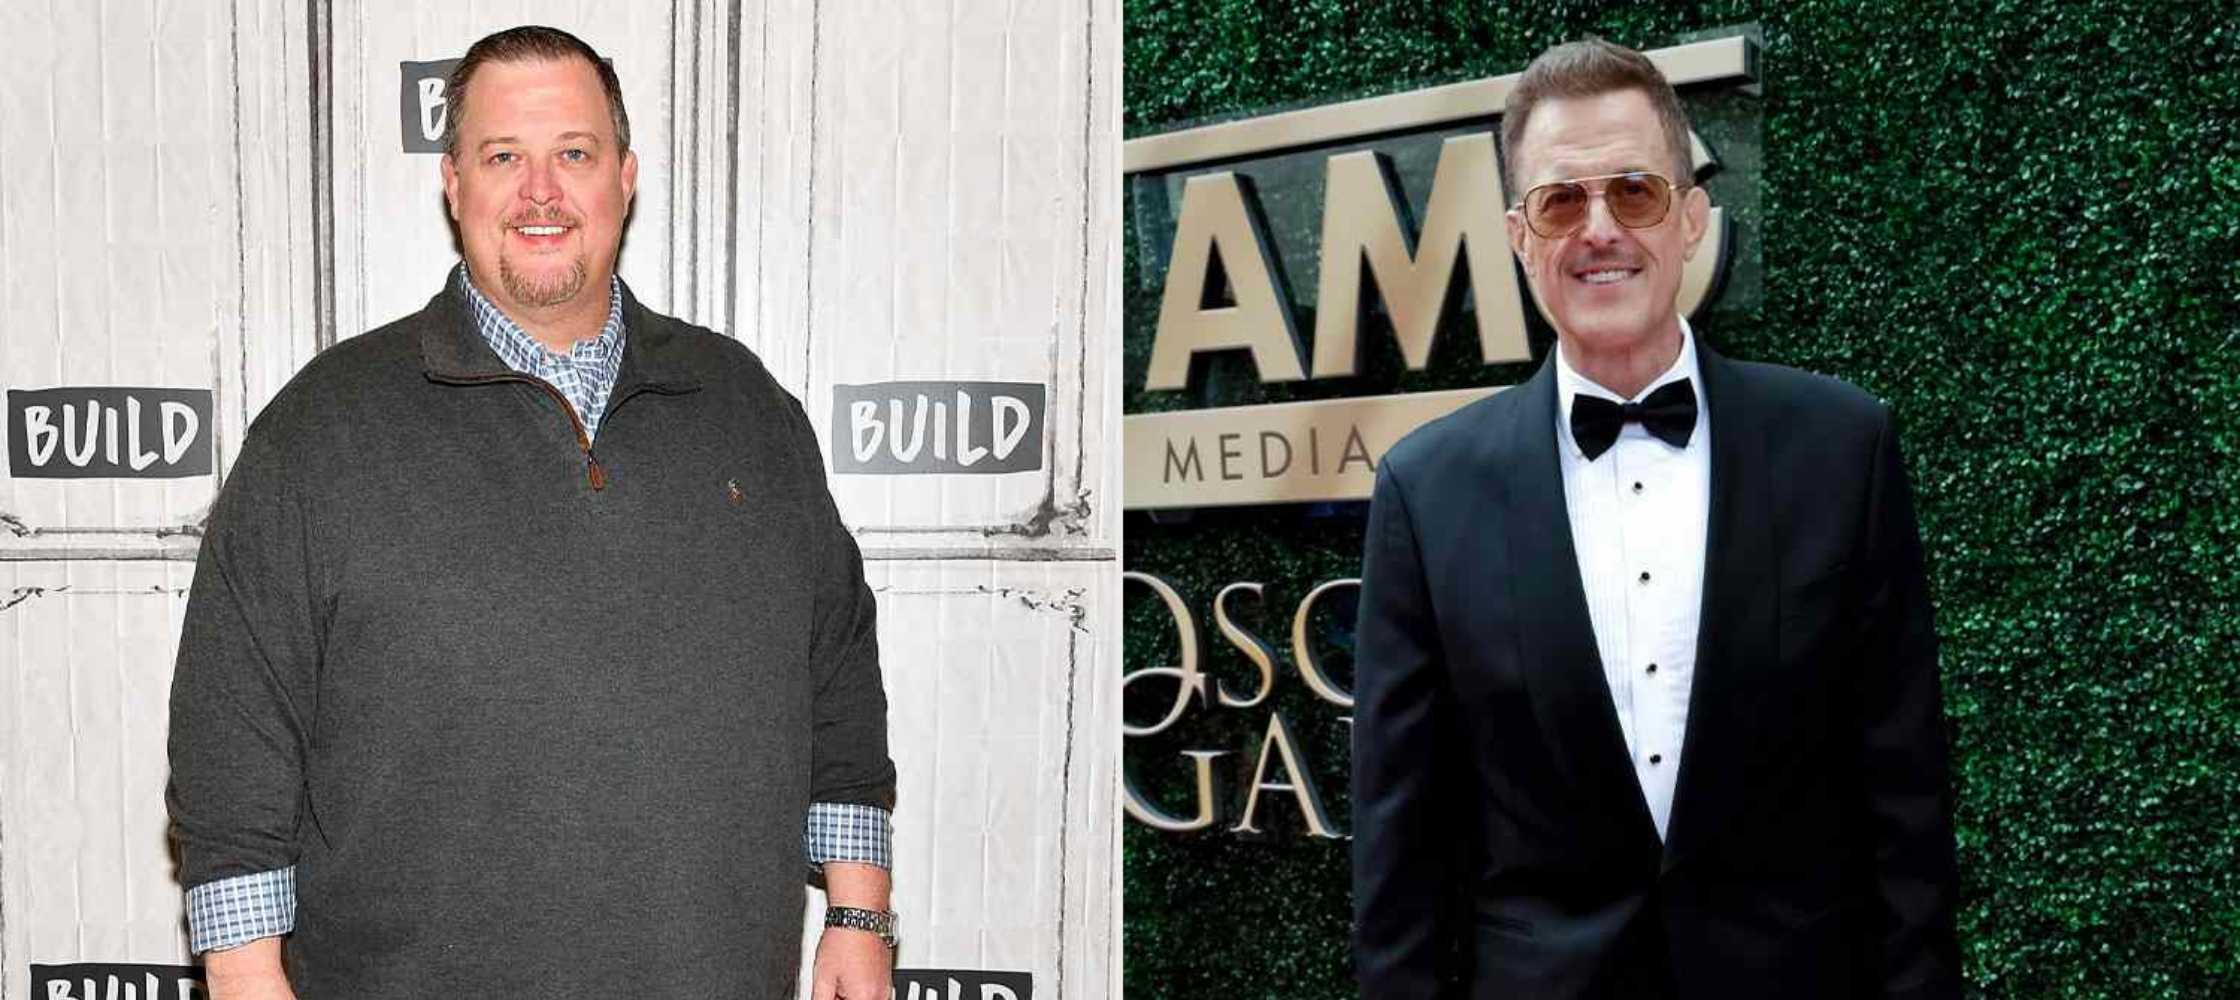 Billy Gardell's Weight Loss, before and after